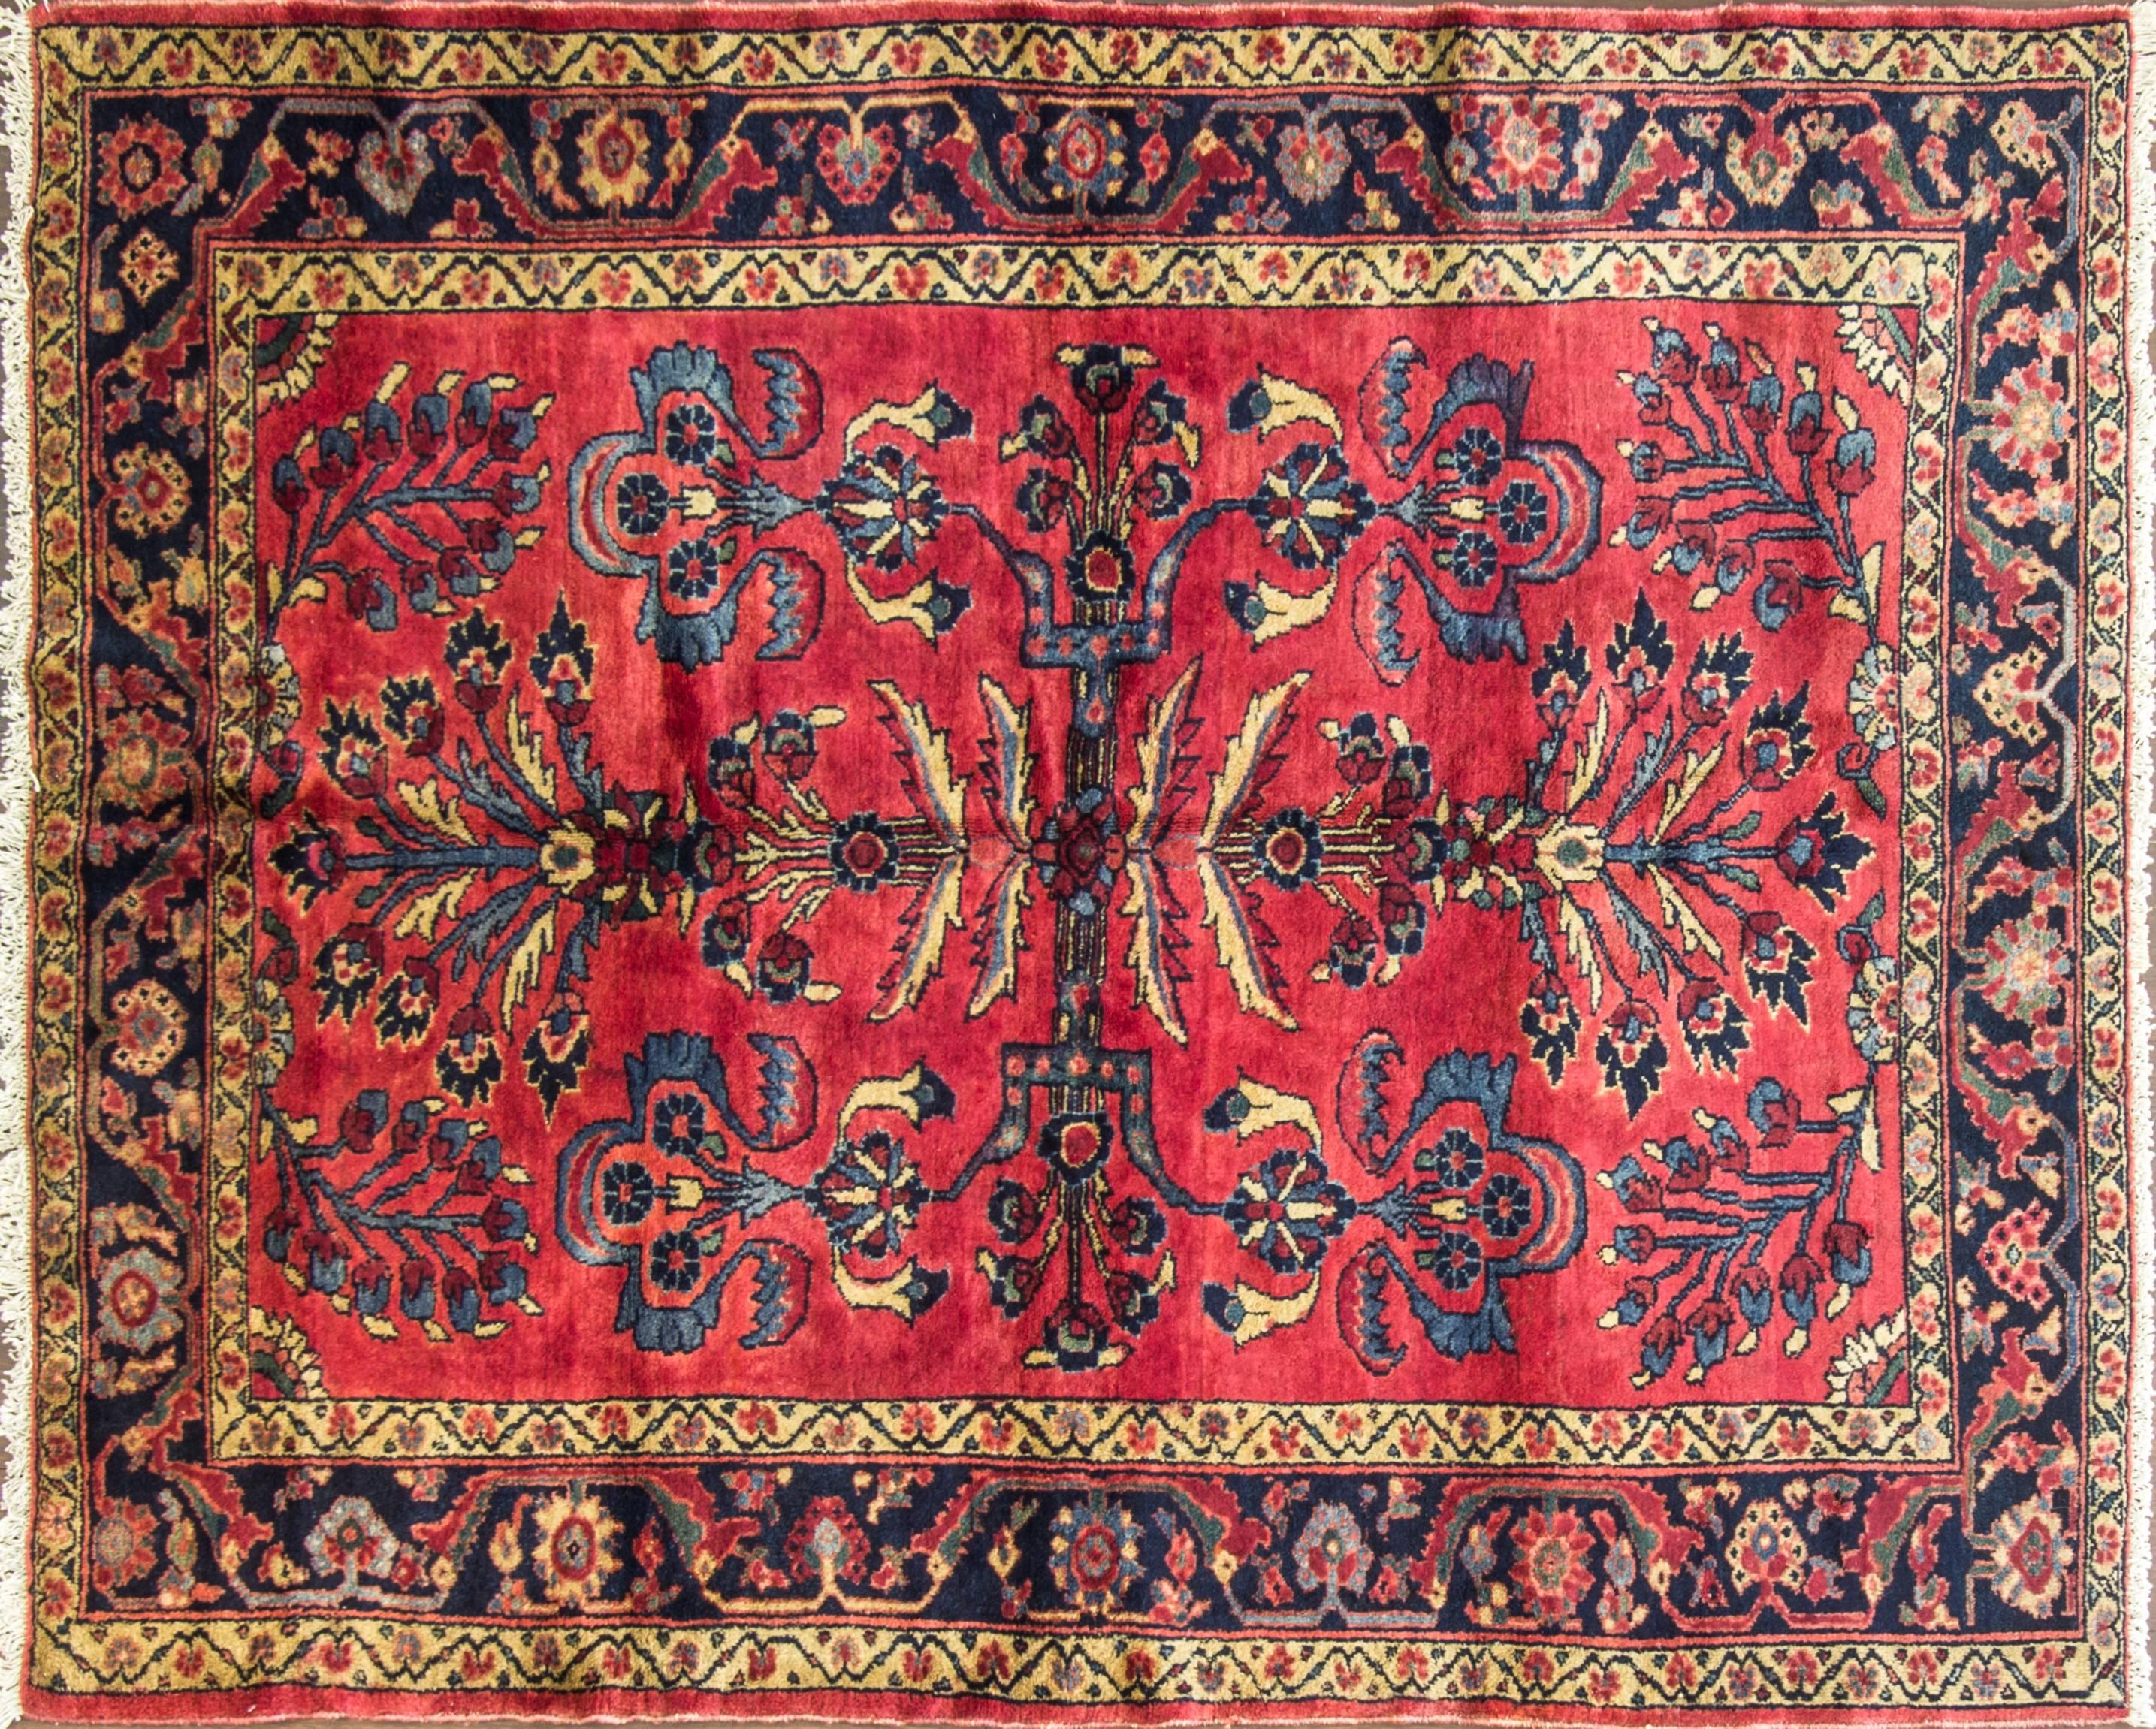 Produced south of the city of Arak by Armenians in Persia, Lilihan rugs are known for their design. Traditionally designed with a curvilinear lattice with traditional floral motifs these rugs also feature geometric designs. The primary